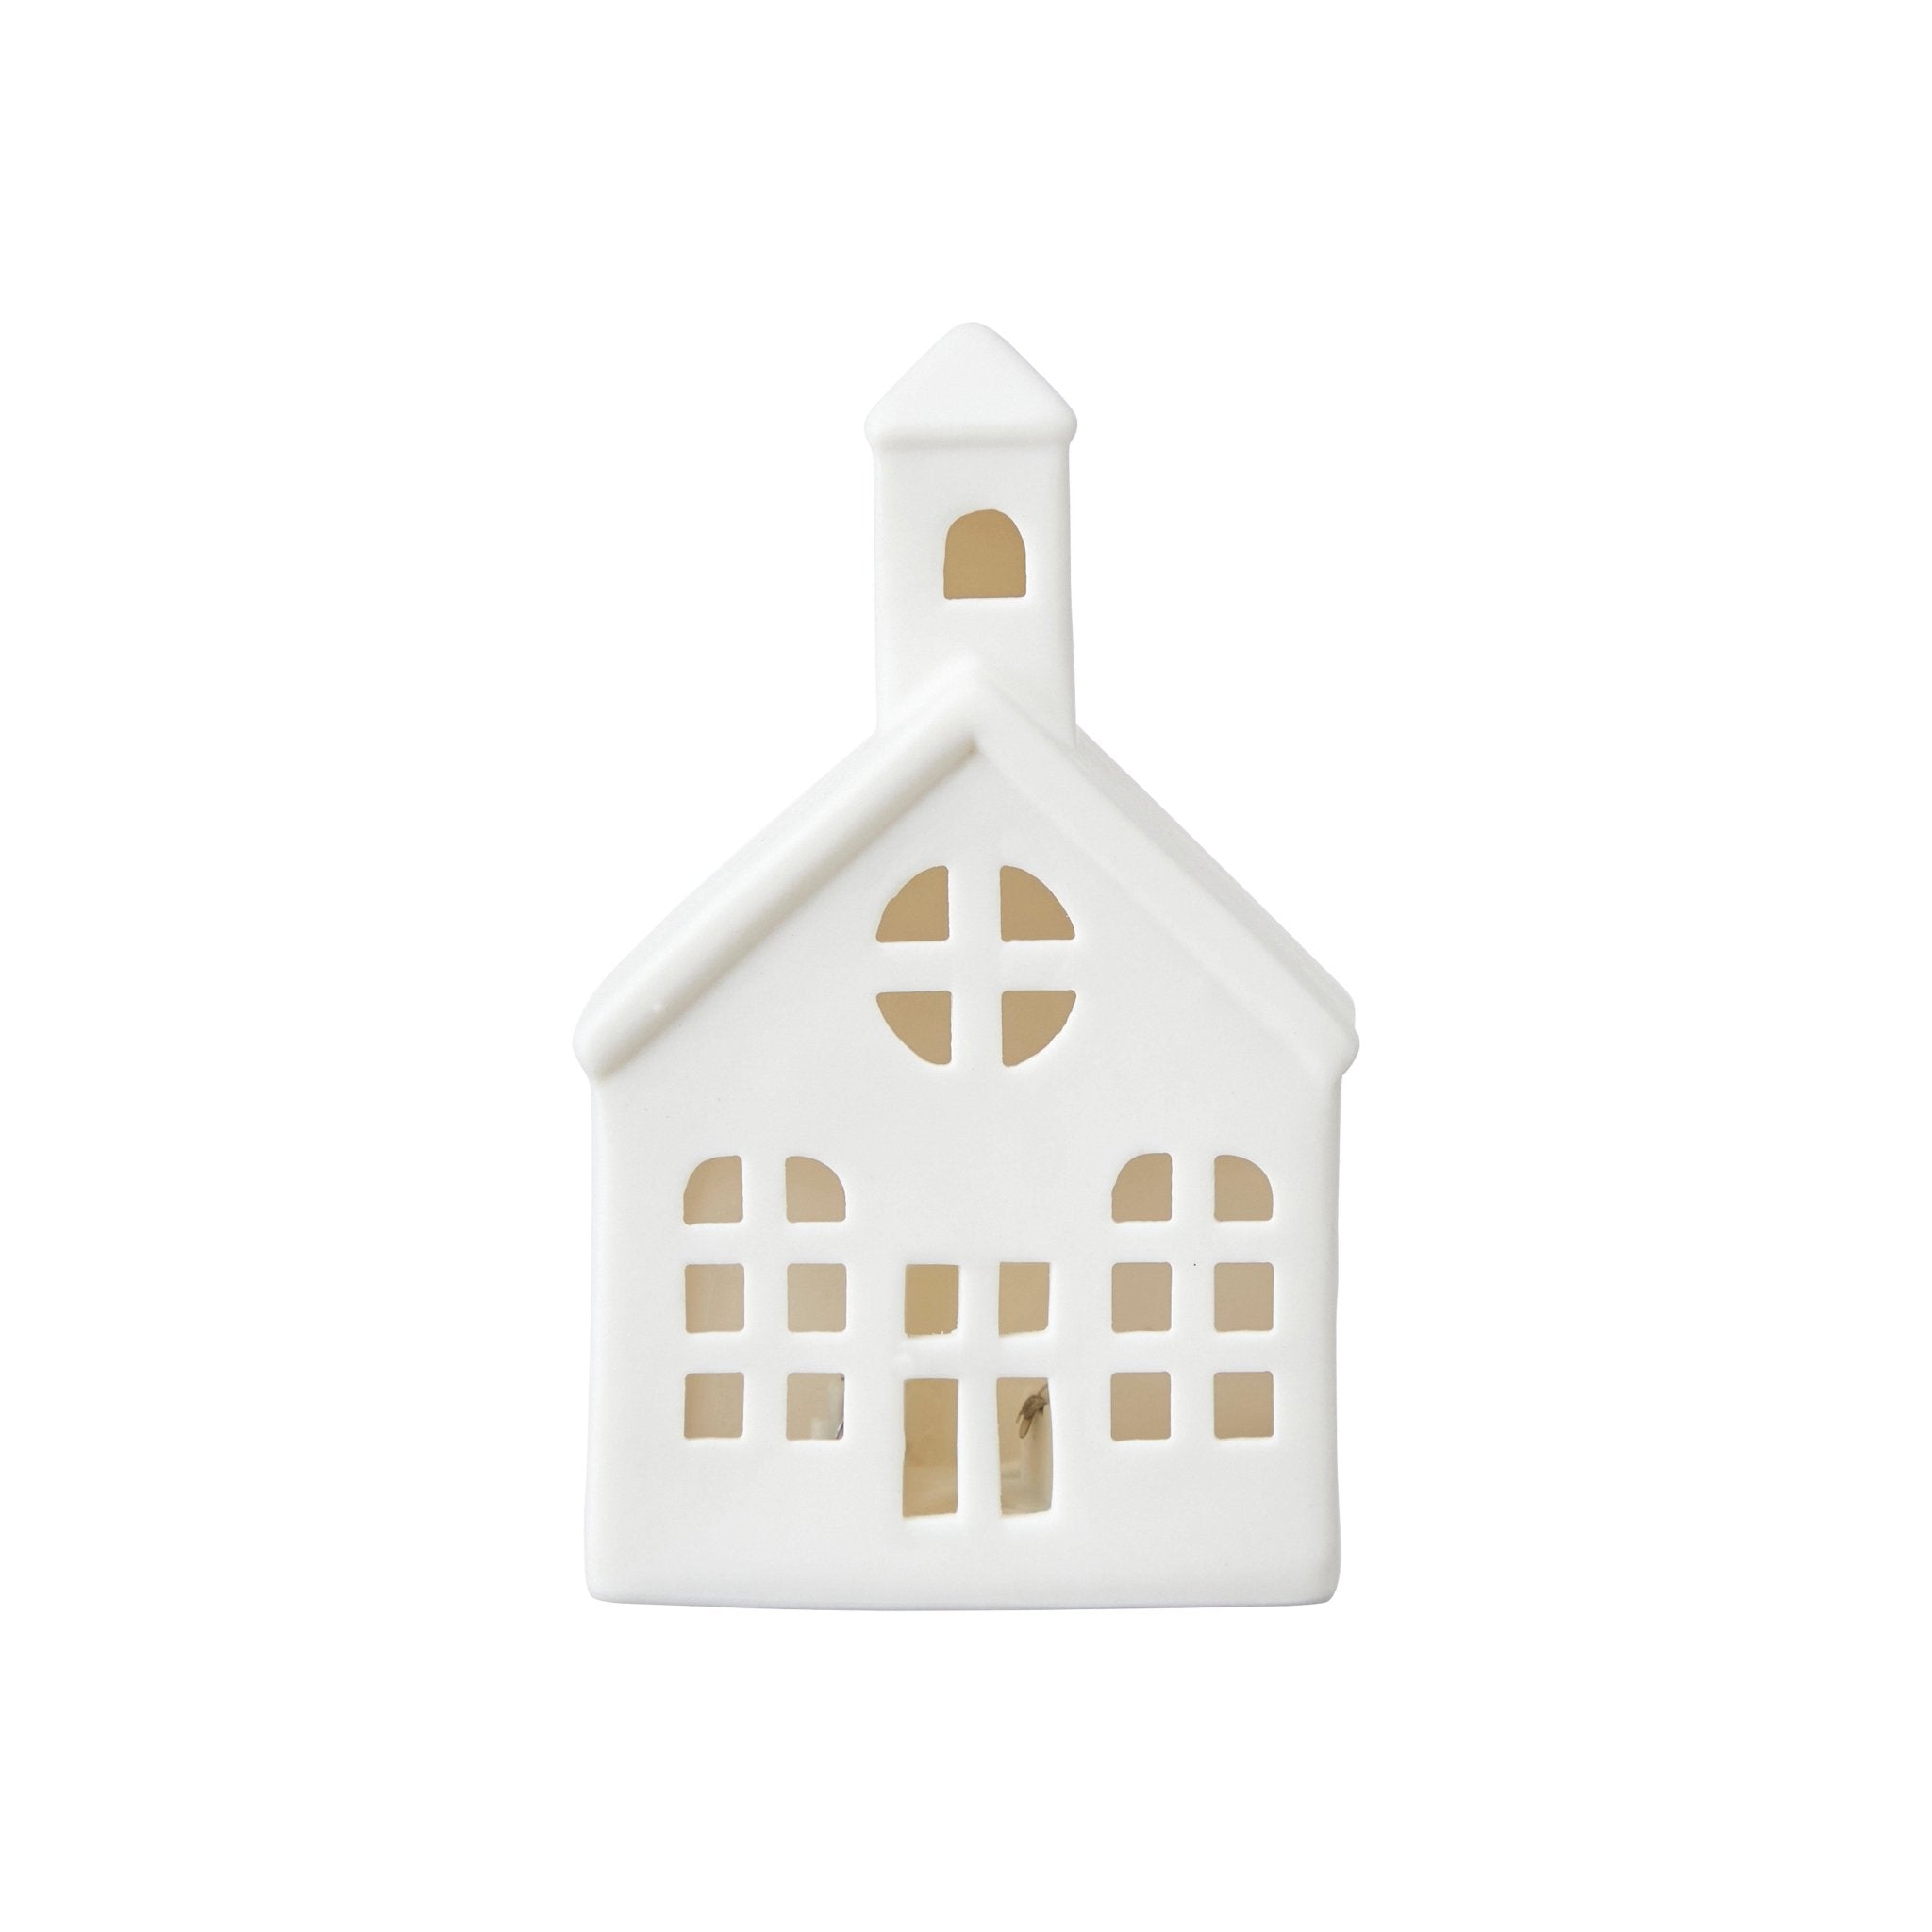 Set of 3 White Porcelain Houses with LEDs - Duck Barn Interiors